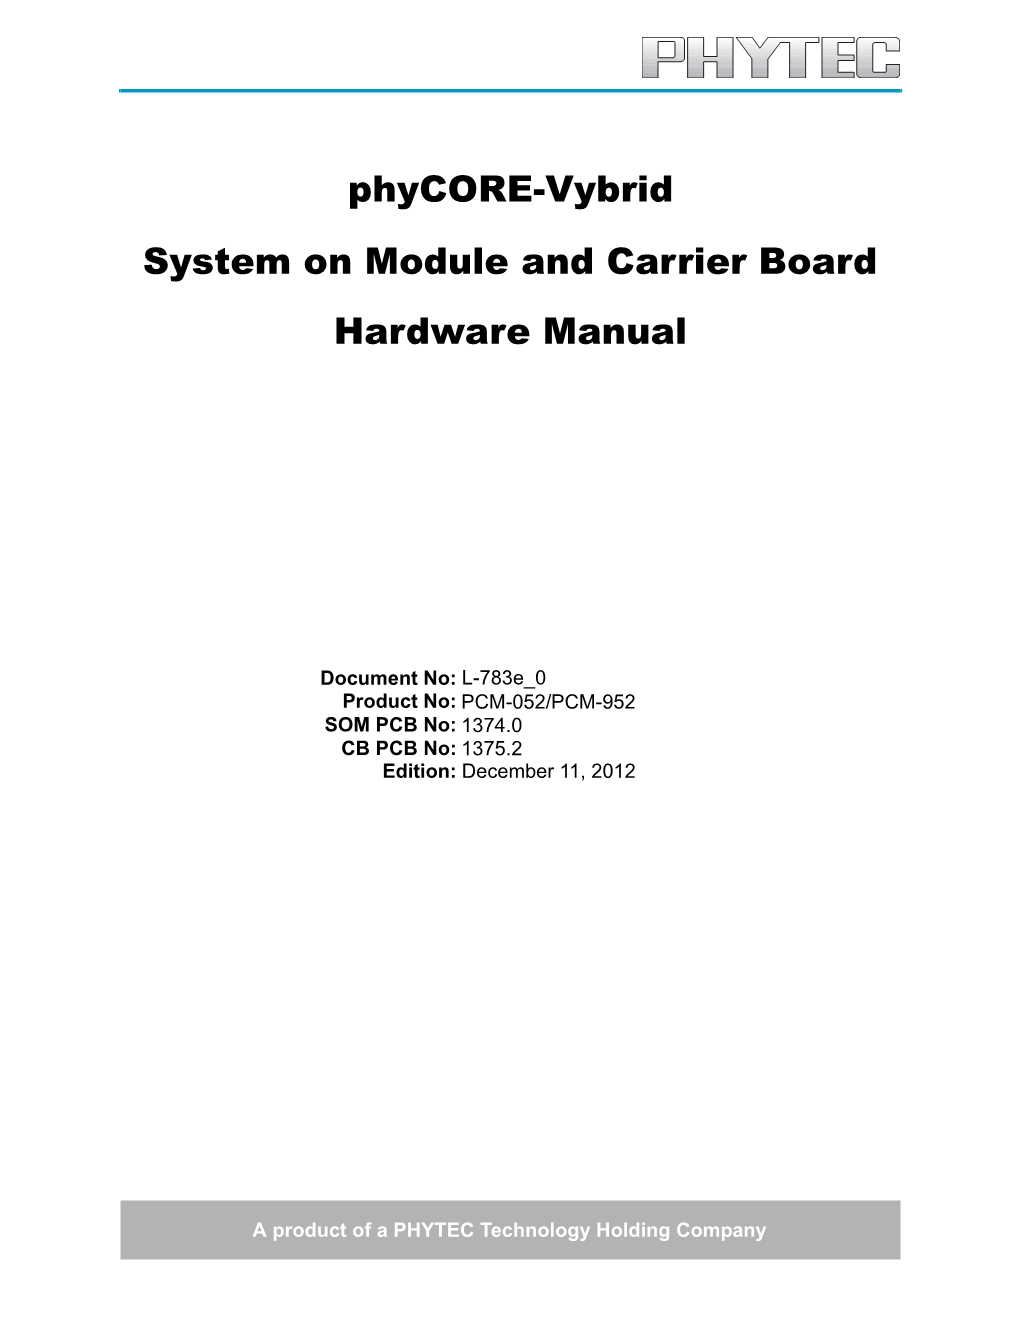 System on Module and Carrier Board Hardware Manual Phycore-Vybrid